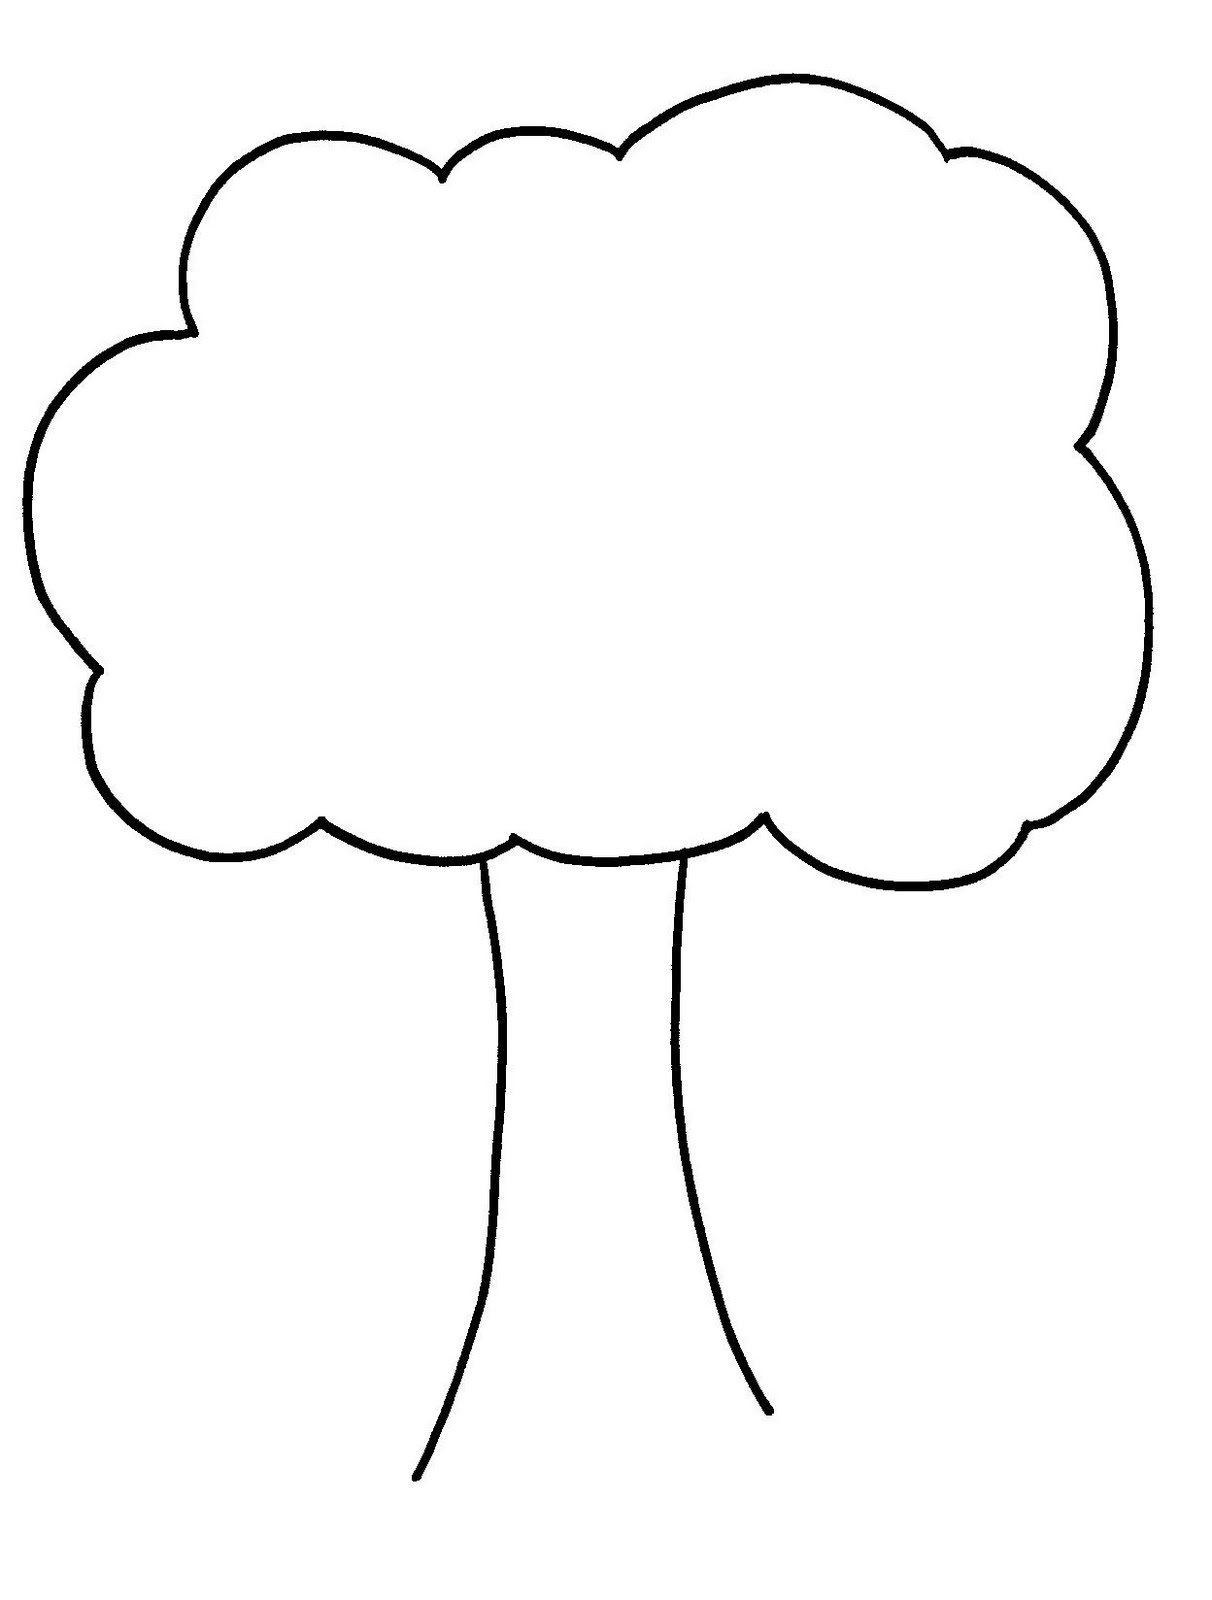 Printable Pictures Of Trees | Free Download Clip Art | Free Clip ...